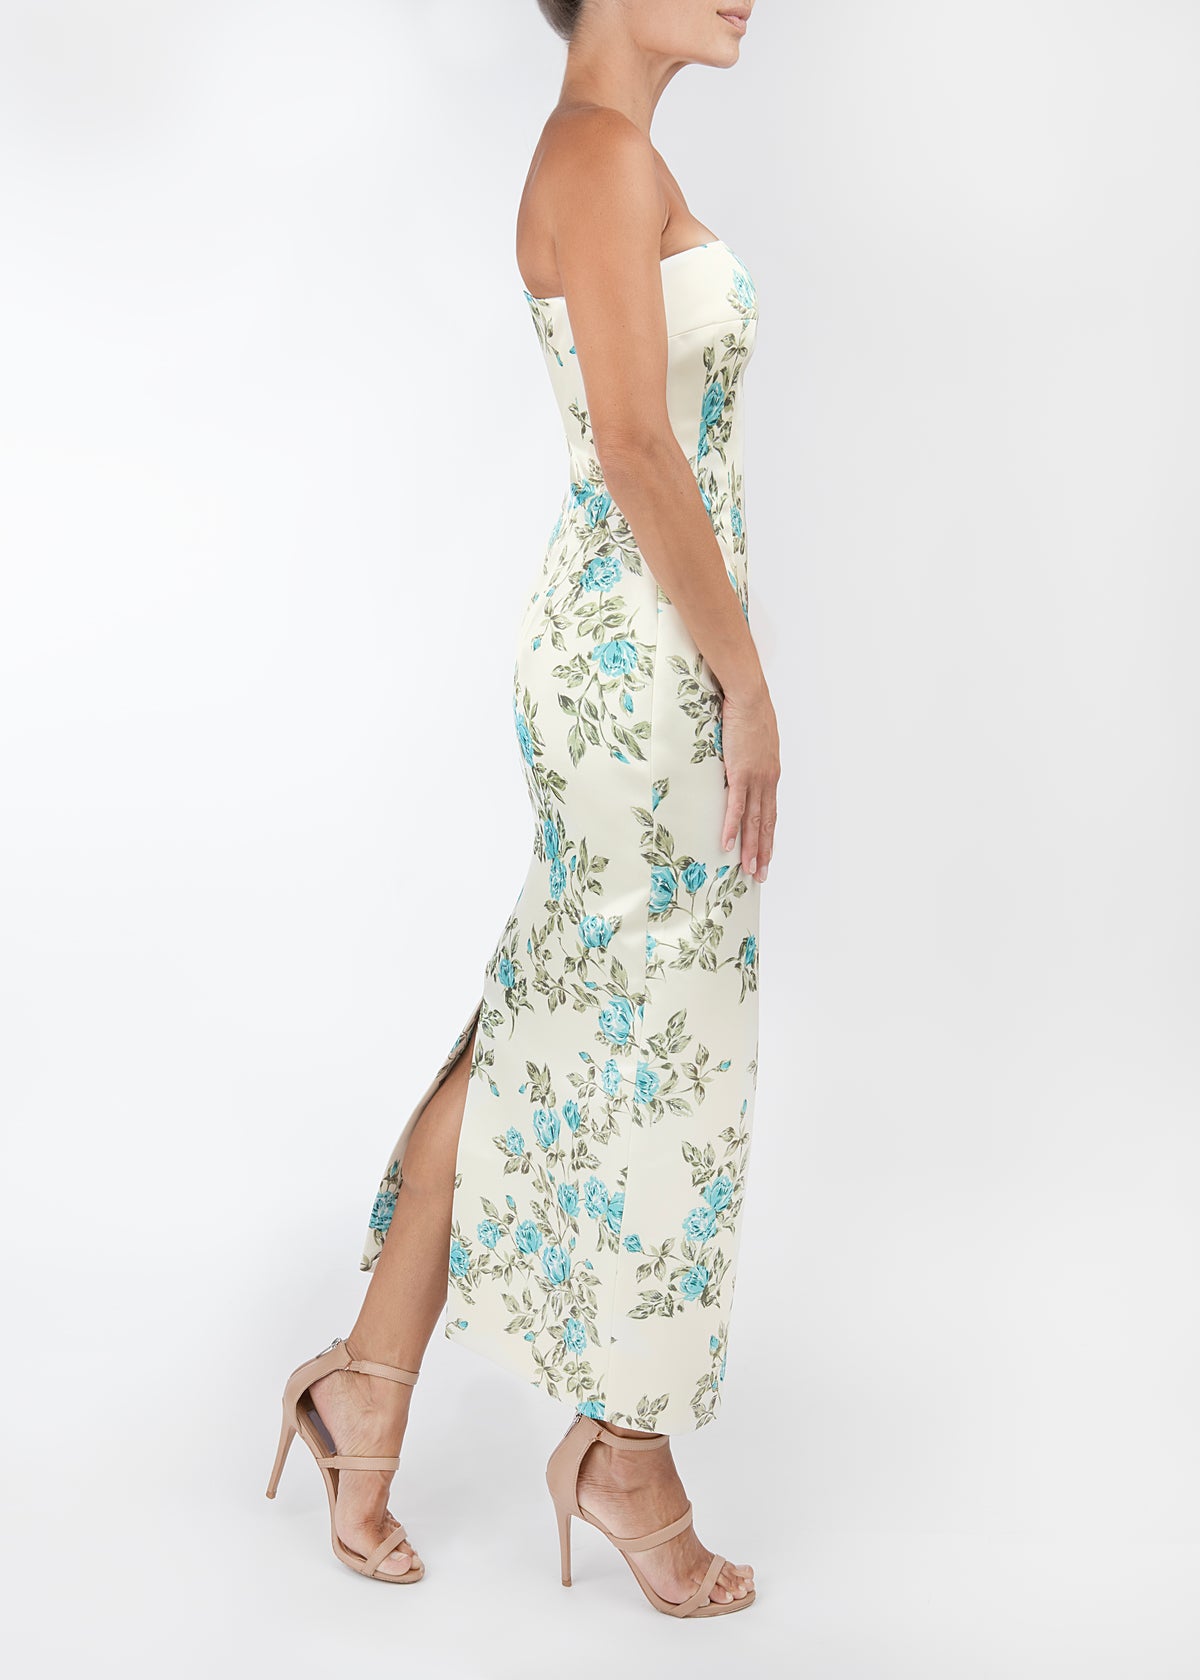 OTM Exclusive: Leila Floral Dress in Blue Turquoise